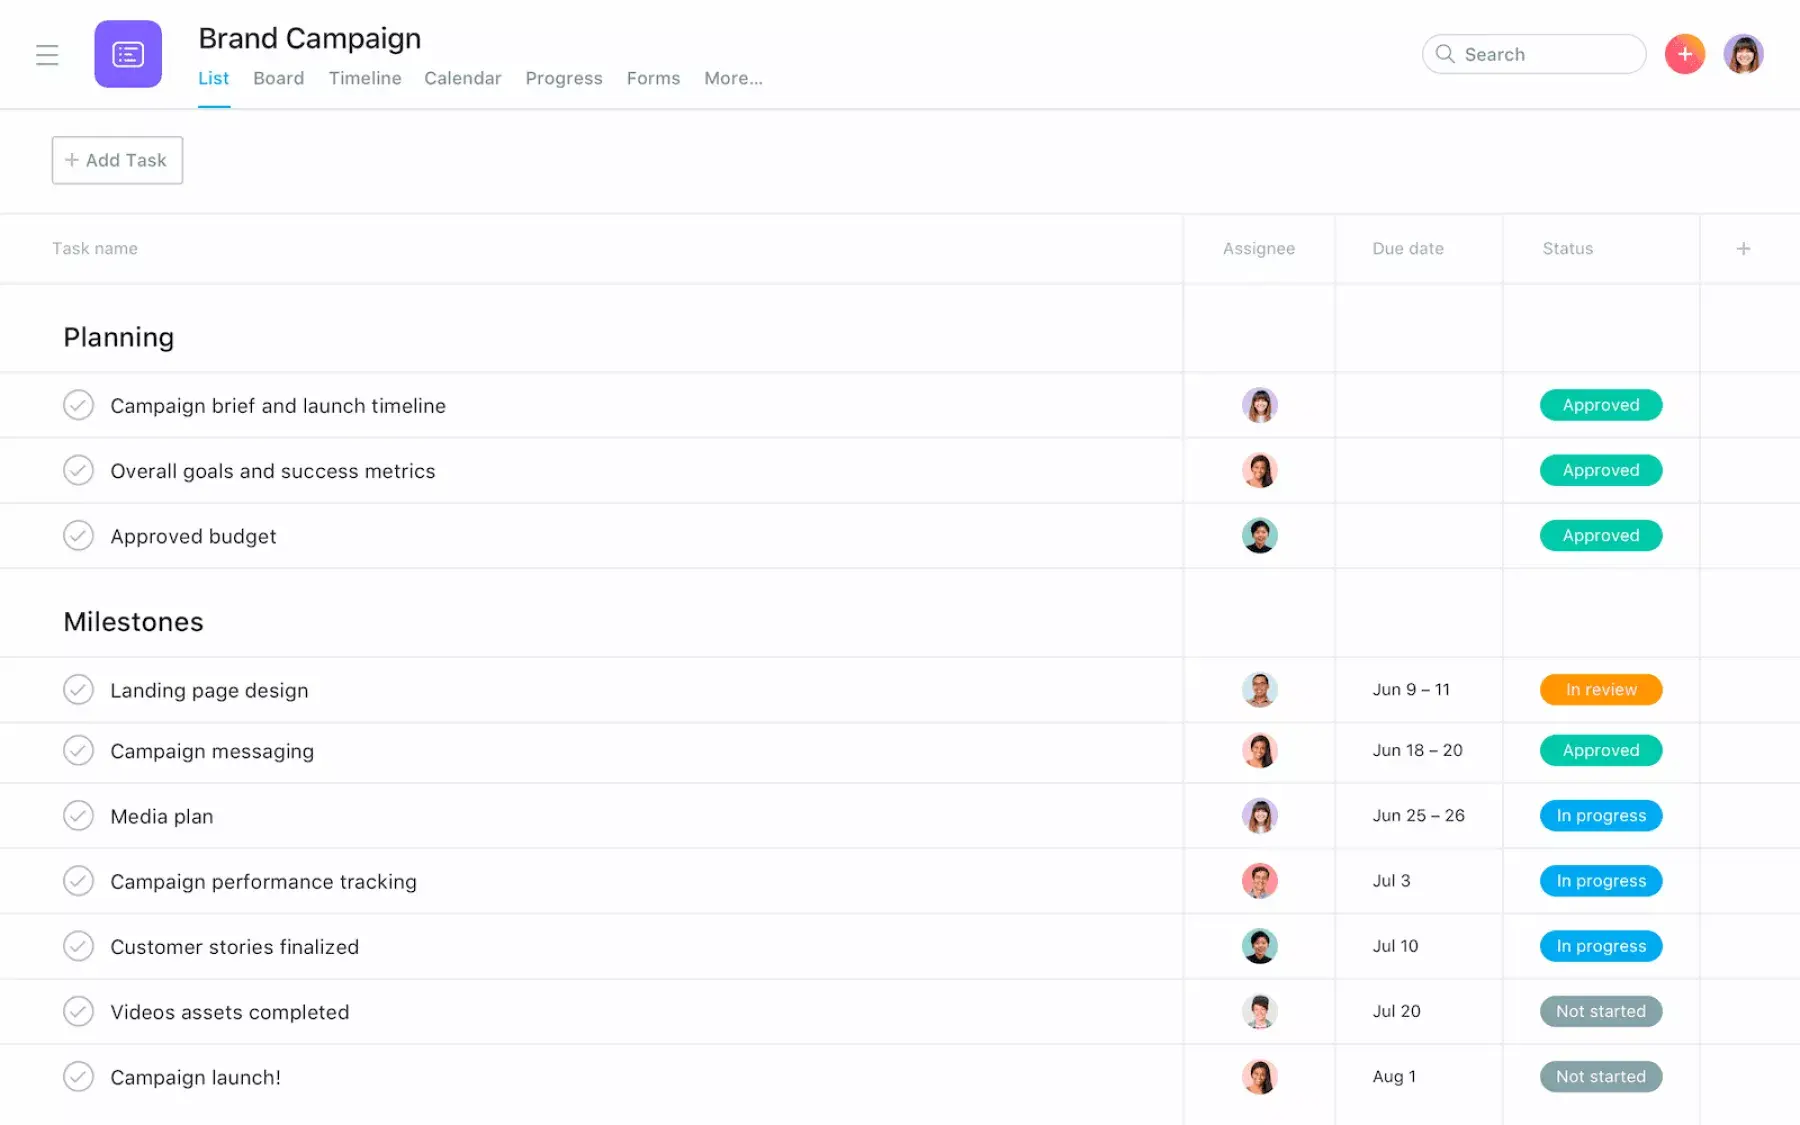 [Product UI] Brand campaign project plan in Asana, spreadsheet-style list (Lists)